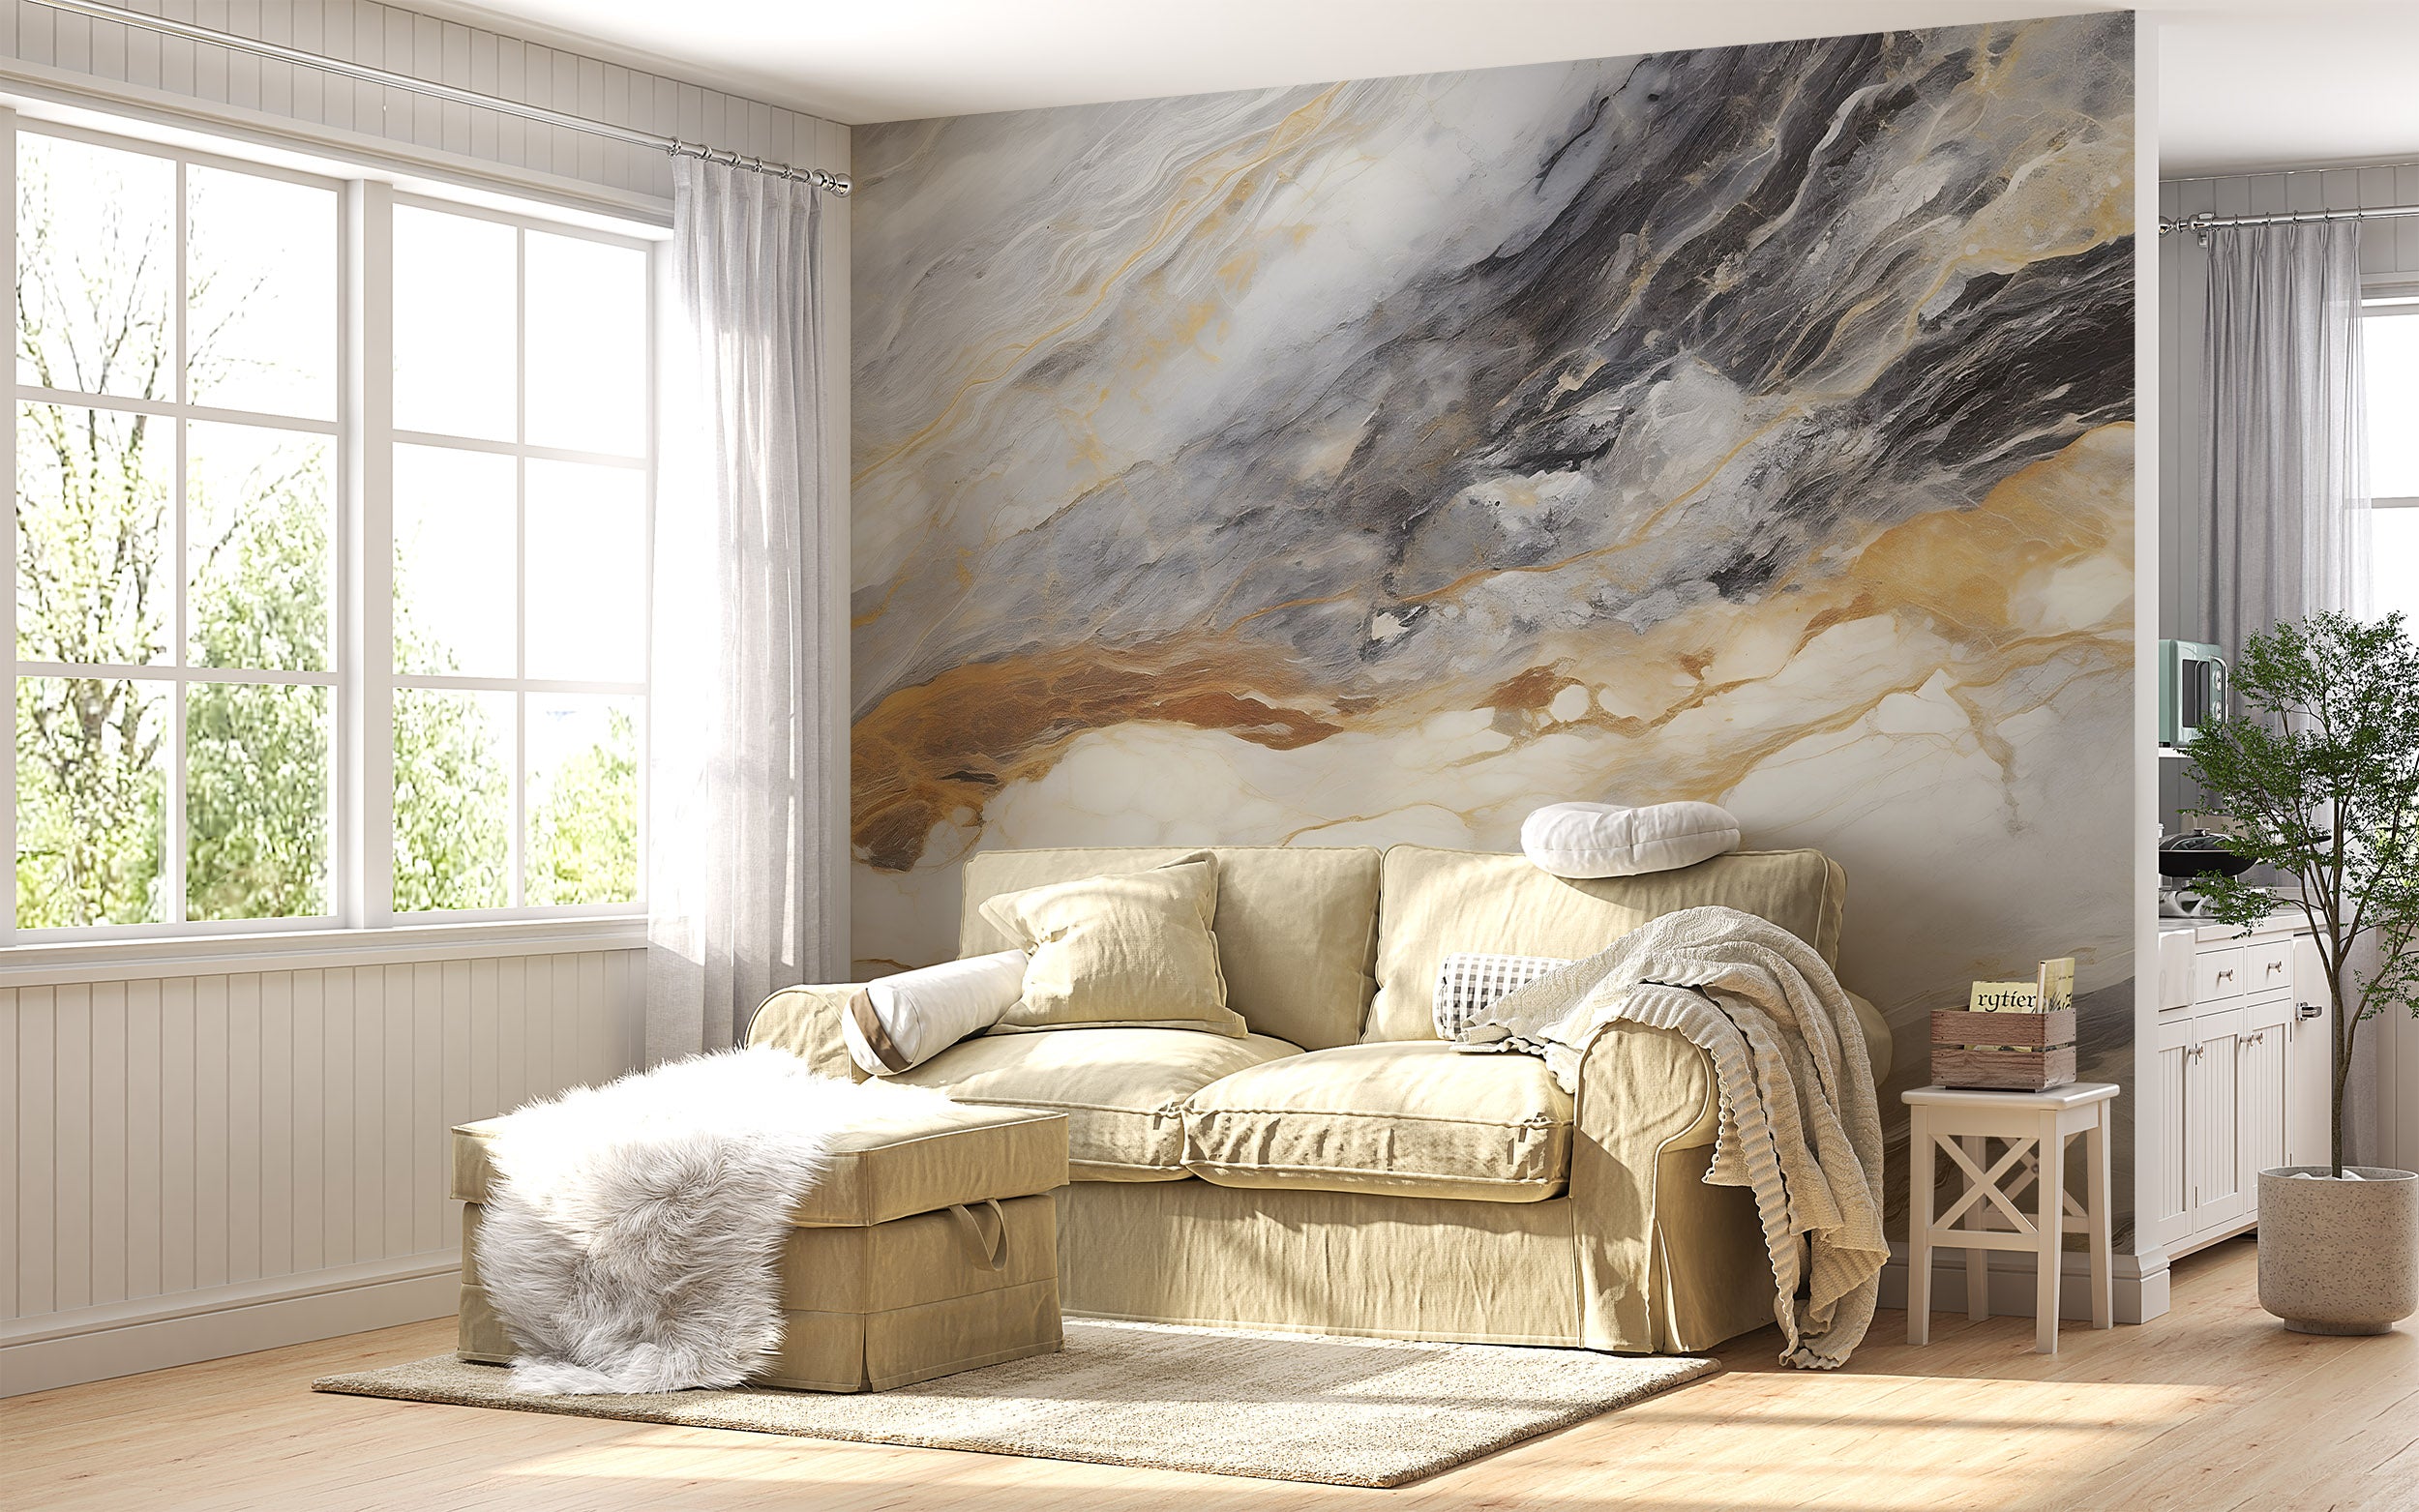 Elevate Your Decor with Luxurious Marble Design Mural